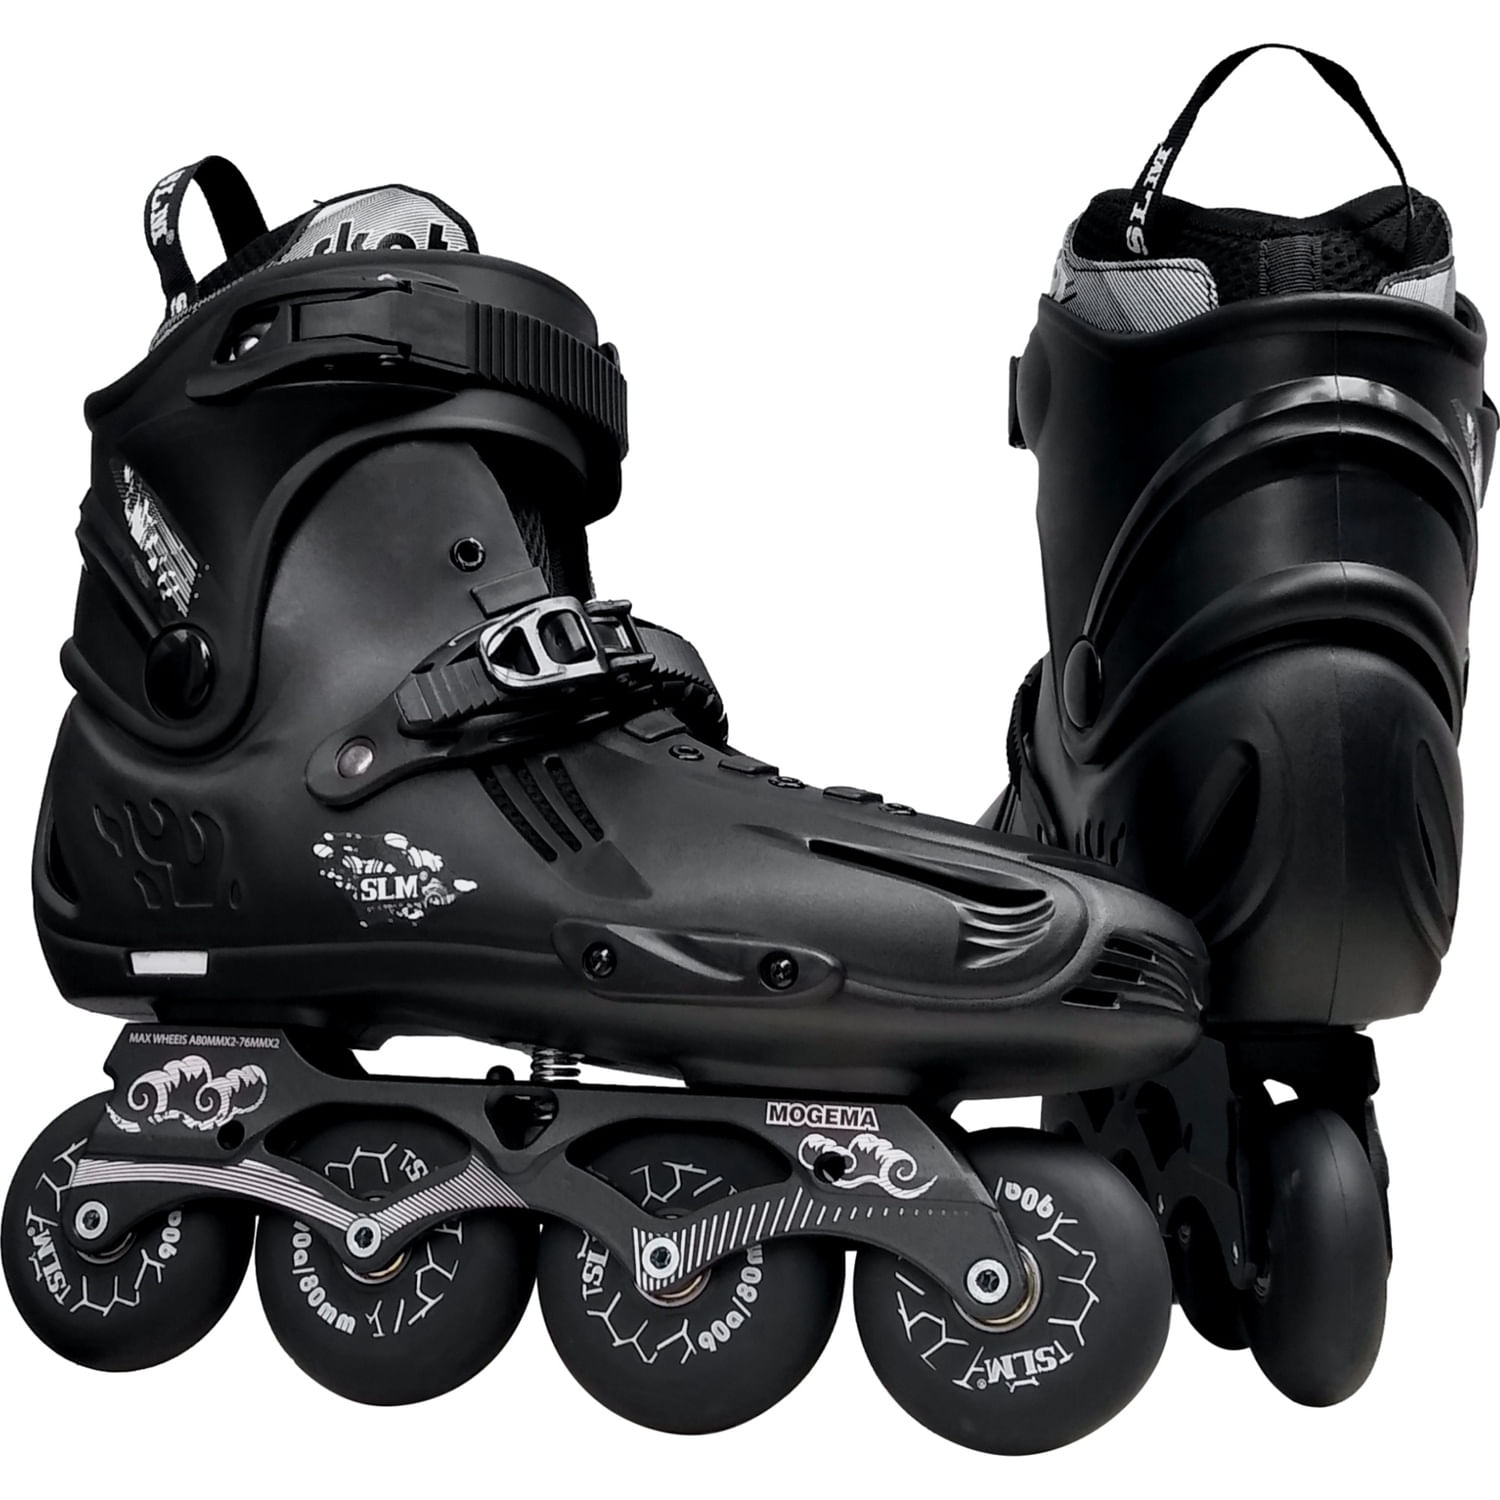 Patines Lineales T/44 SLM Freestyle Profesionales